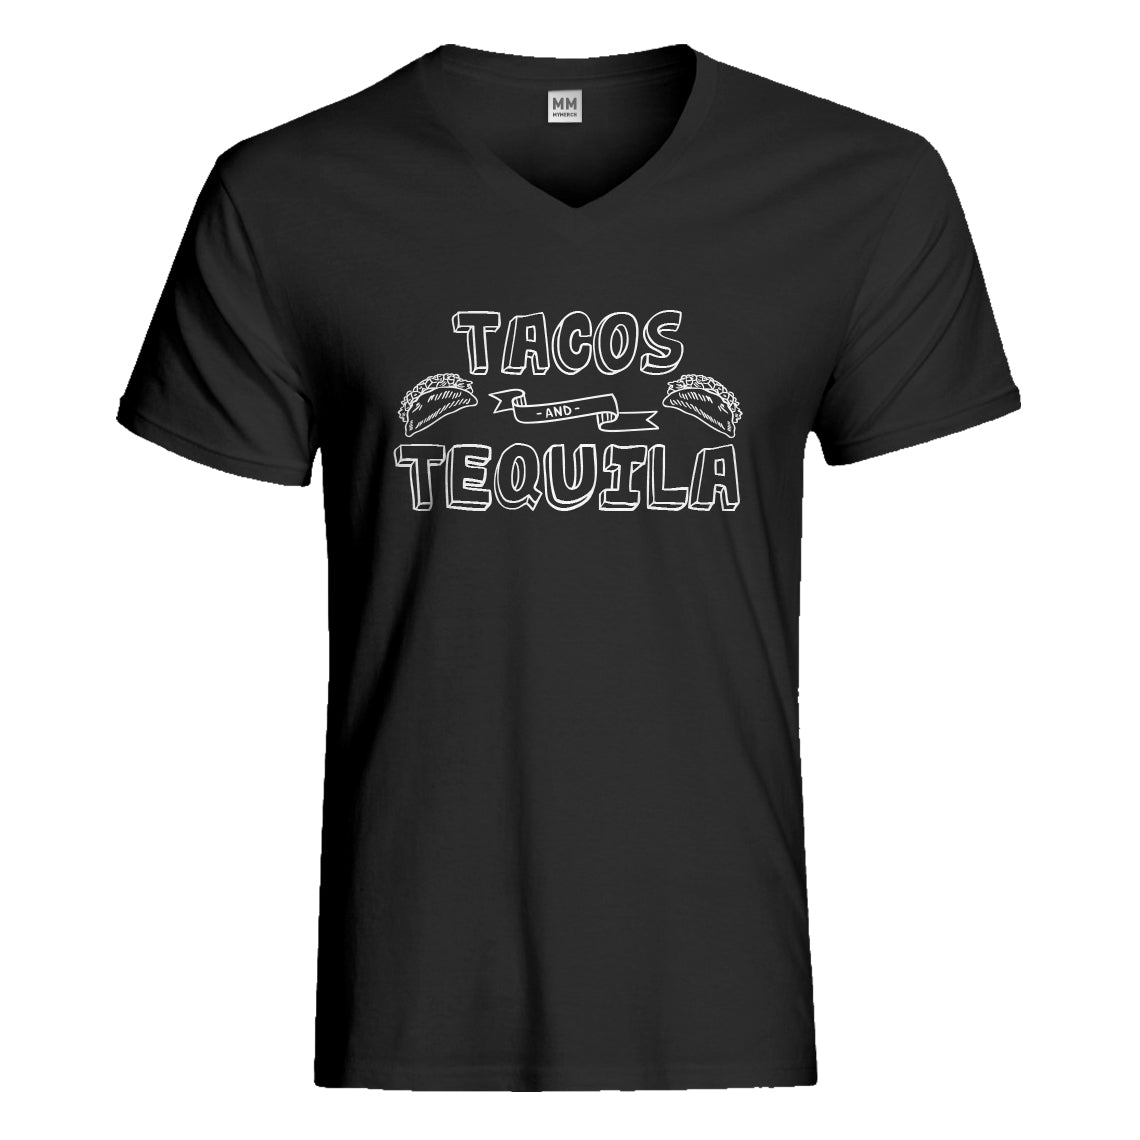 Mens Tacos and Tequila Vneck T-shirt